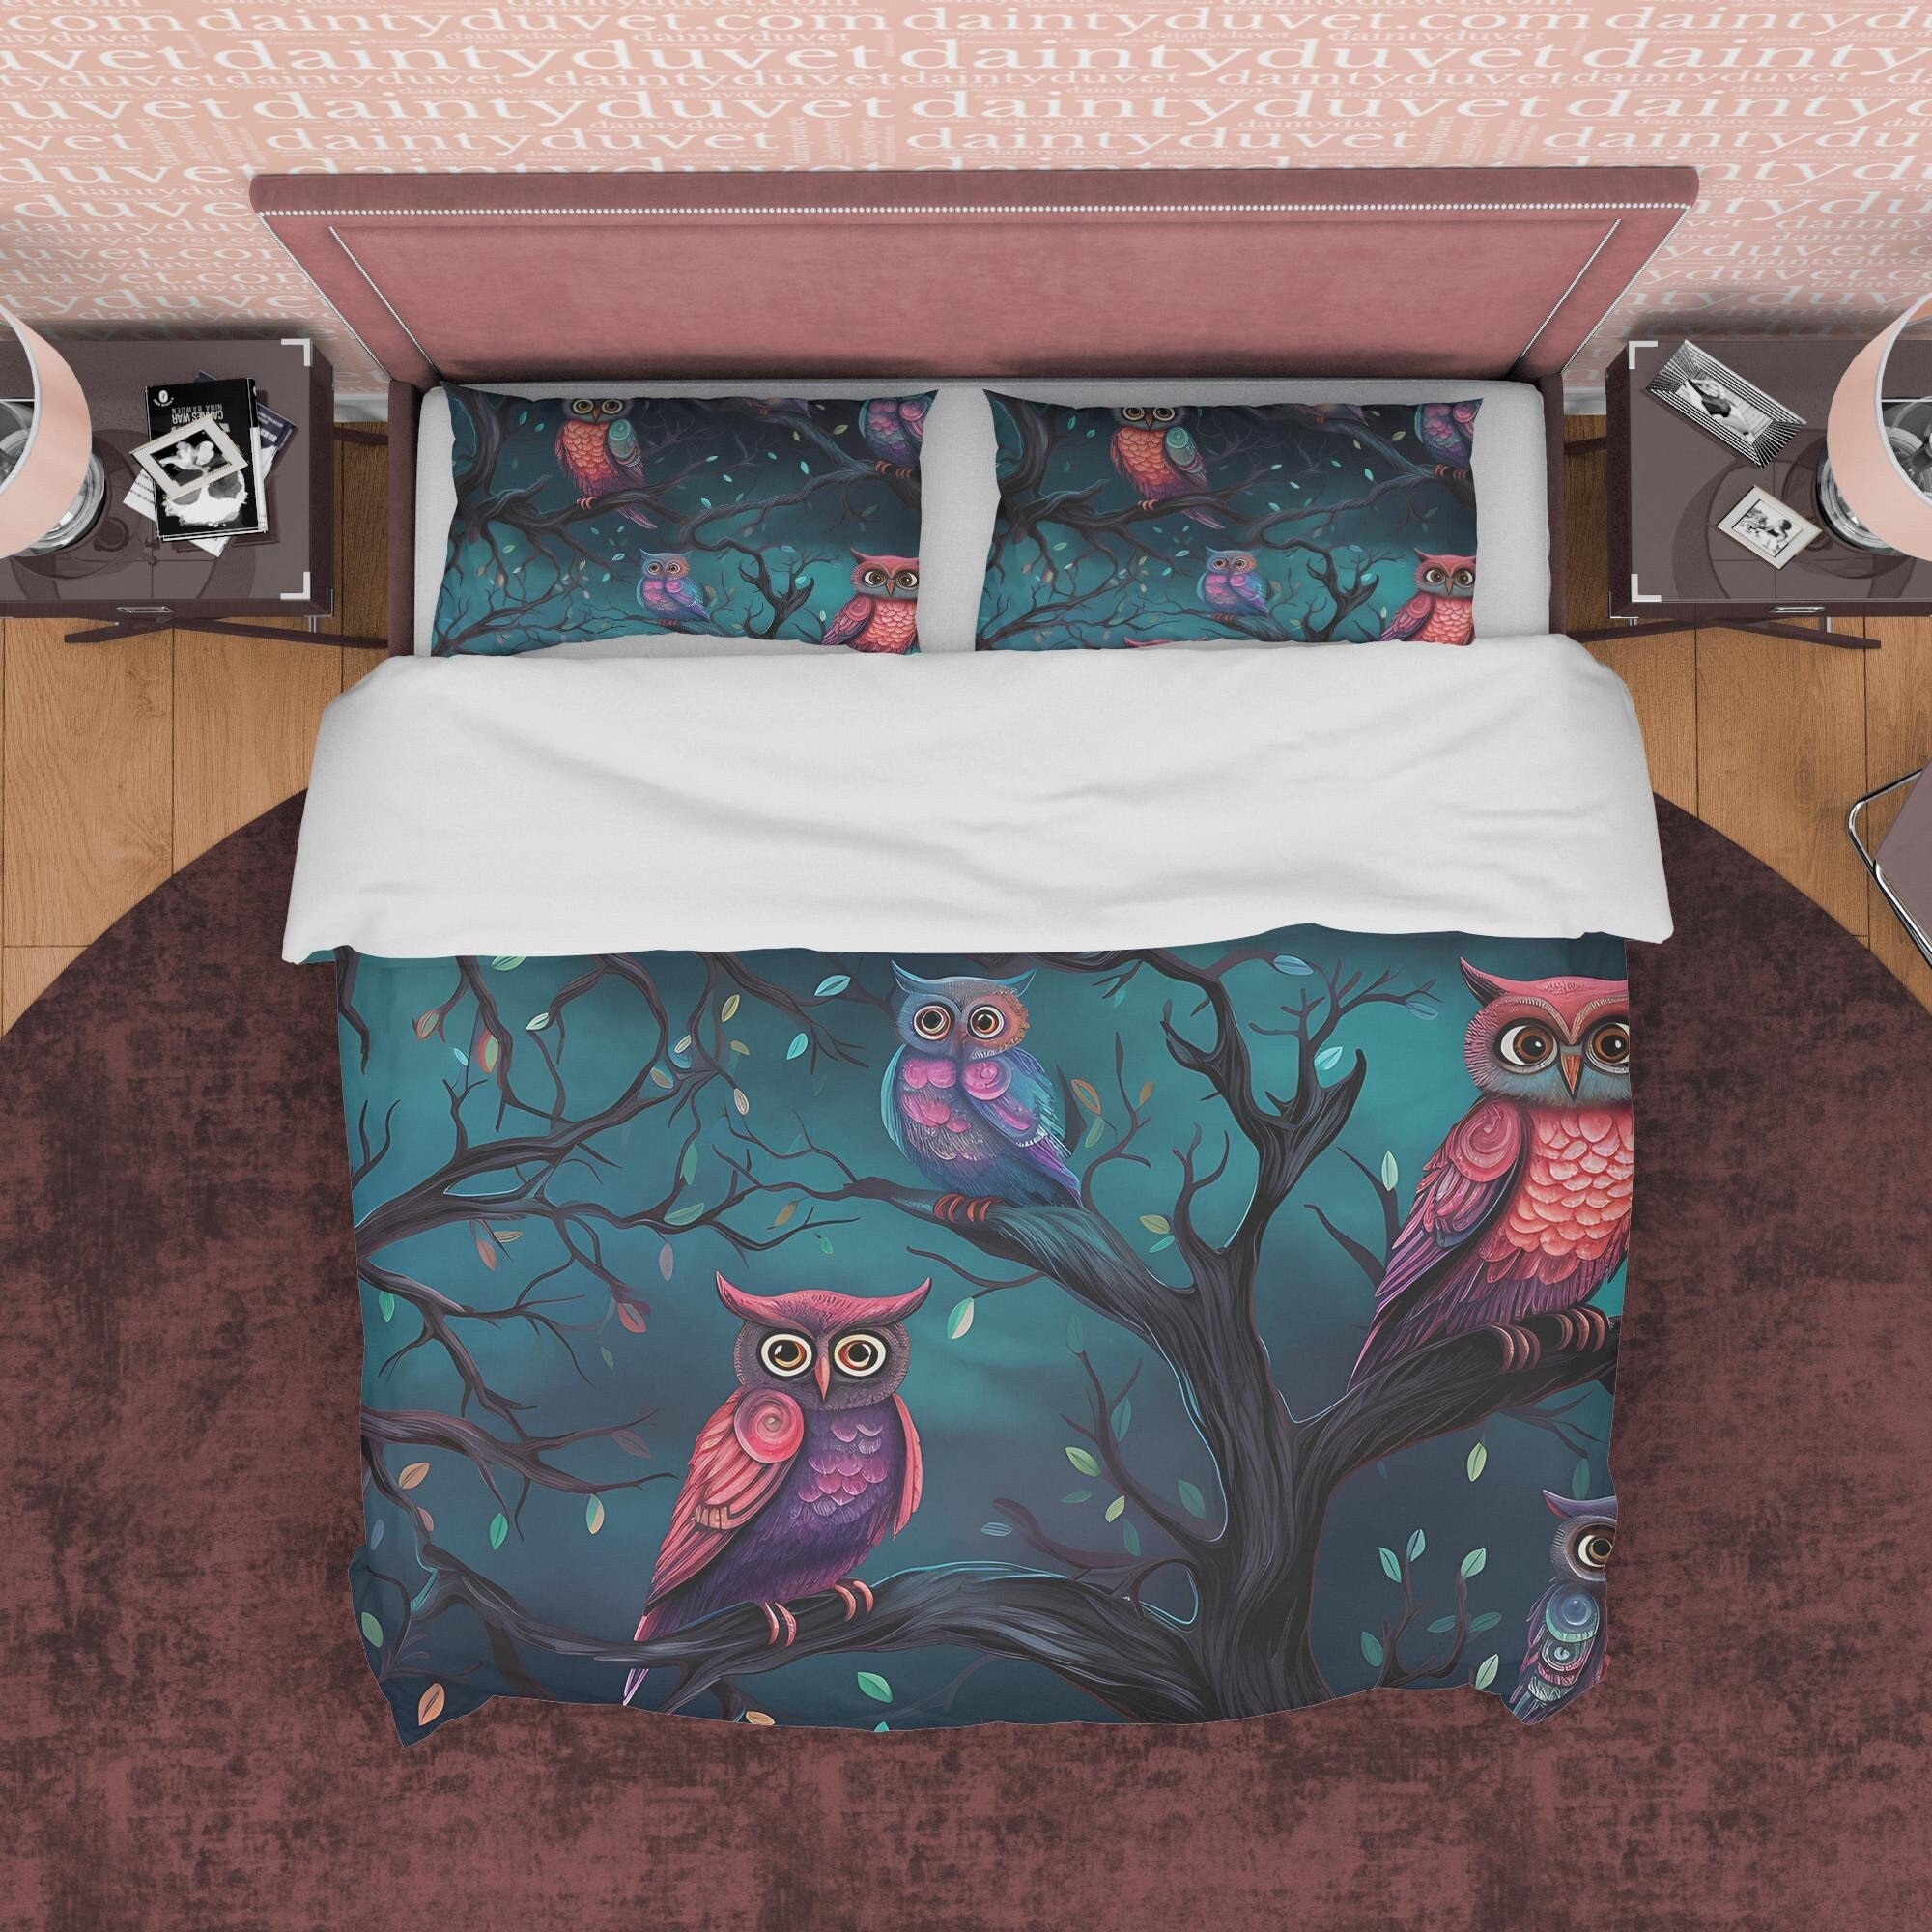 Owl On A Tree Branch Duvet Cover Set, Spooky Night Aesthetic Zipper Bedding, Halloween Room Decor, Green Midnight Scary Print Blanket Cover